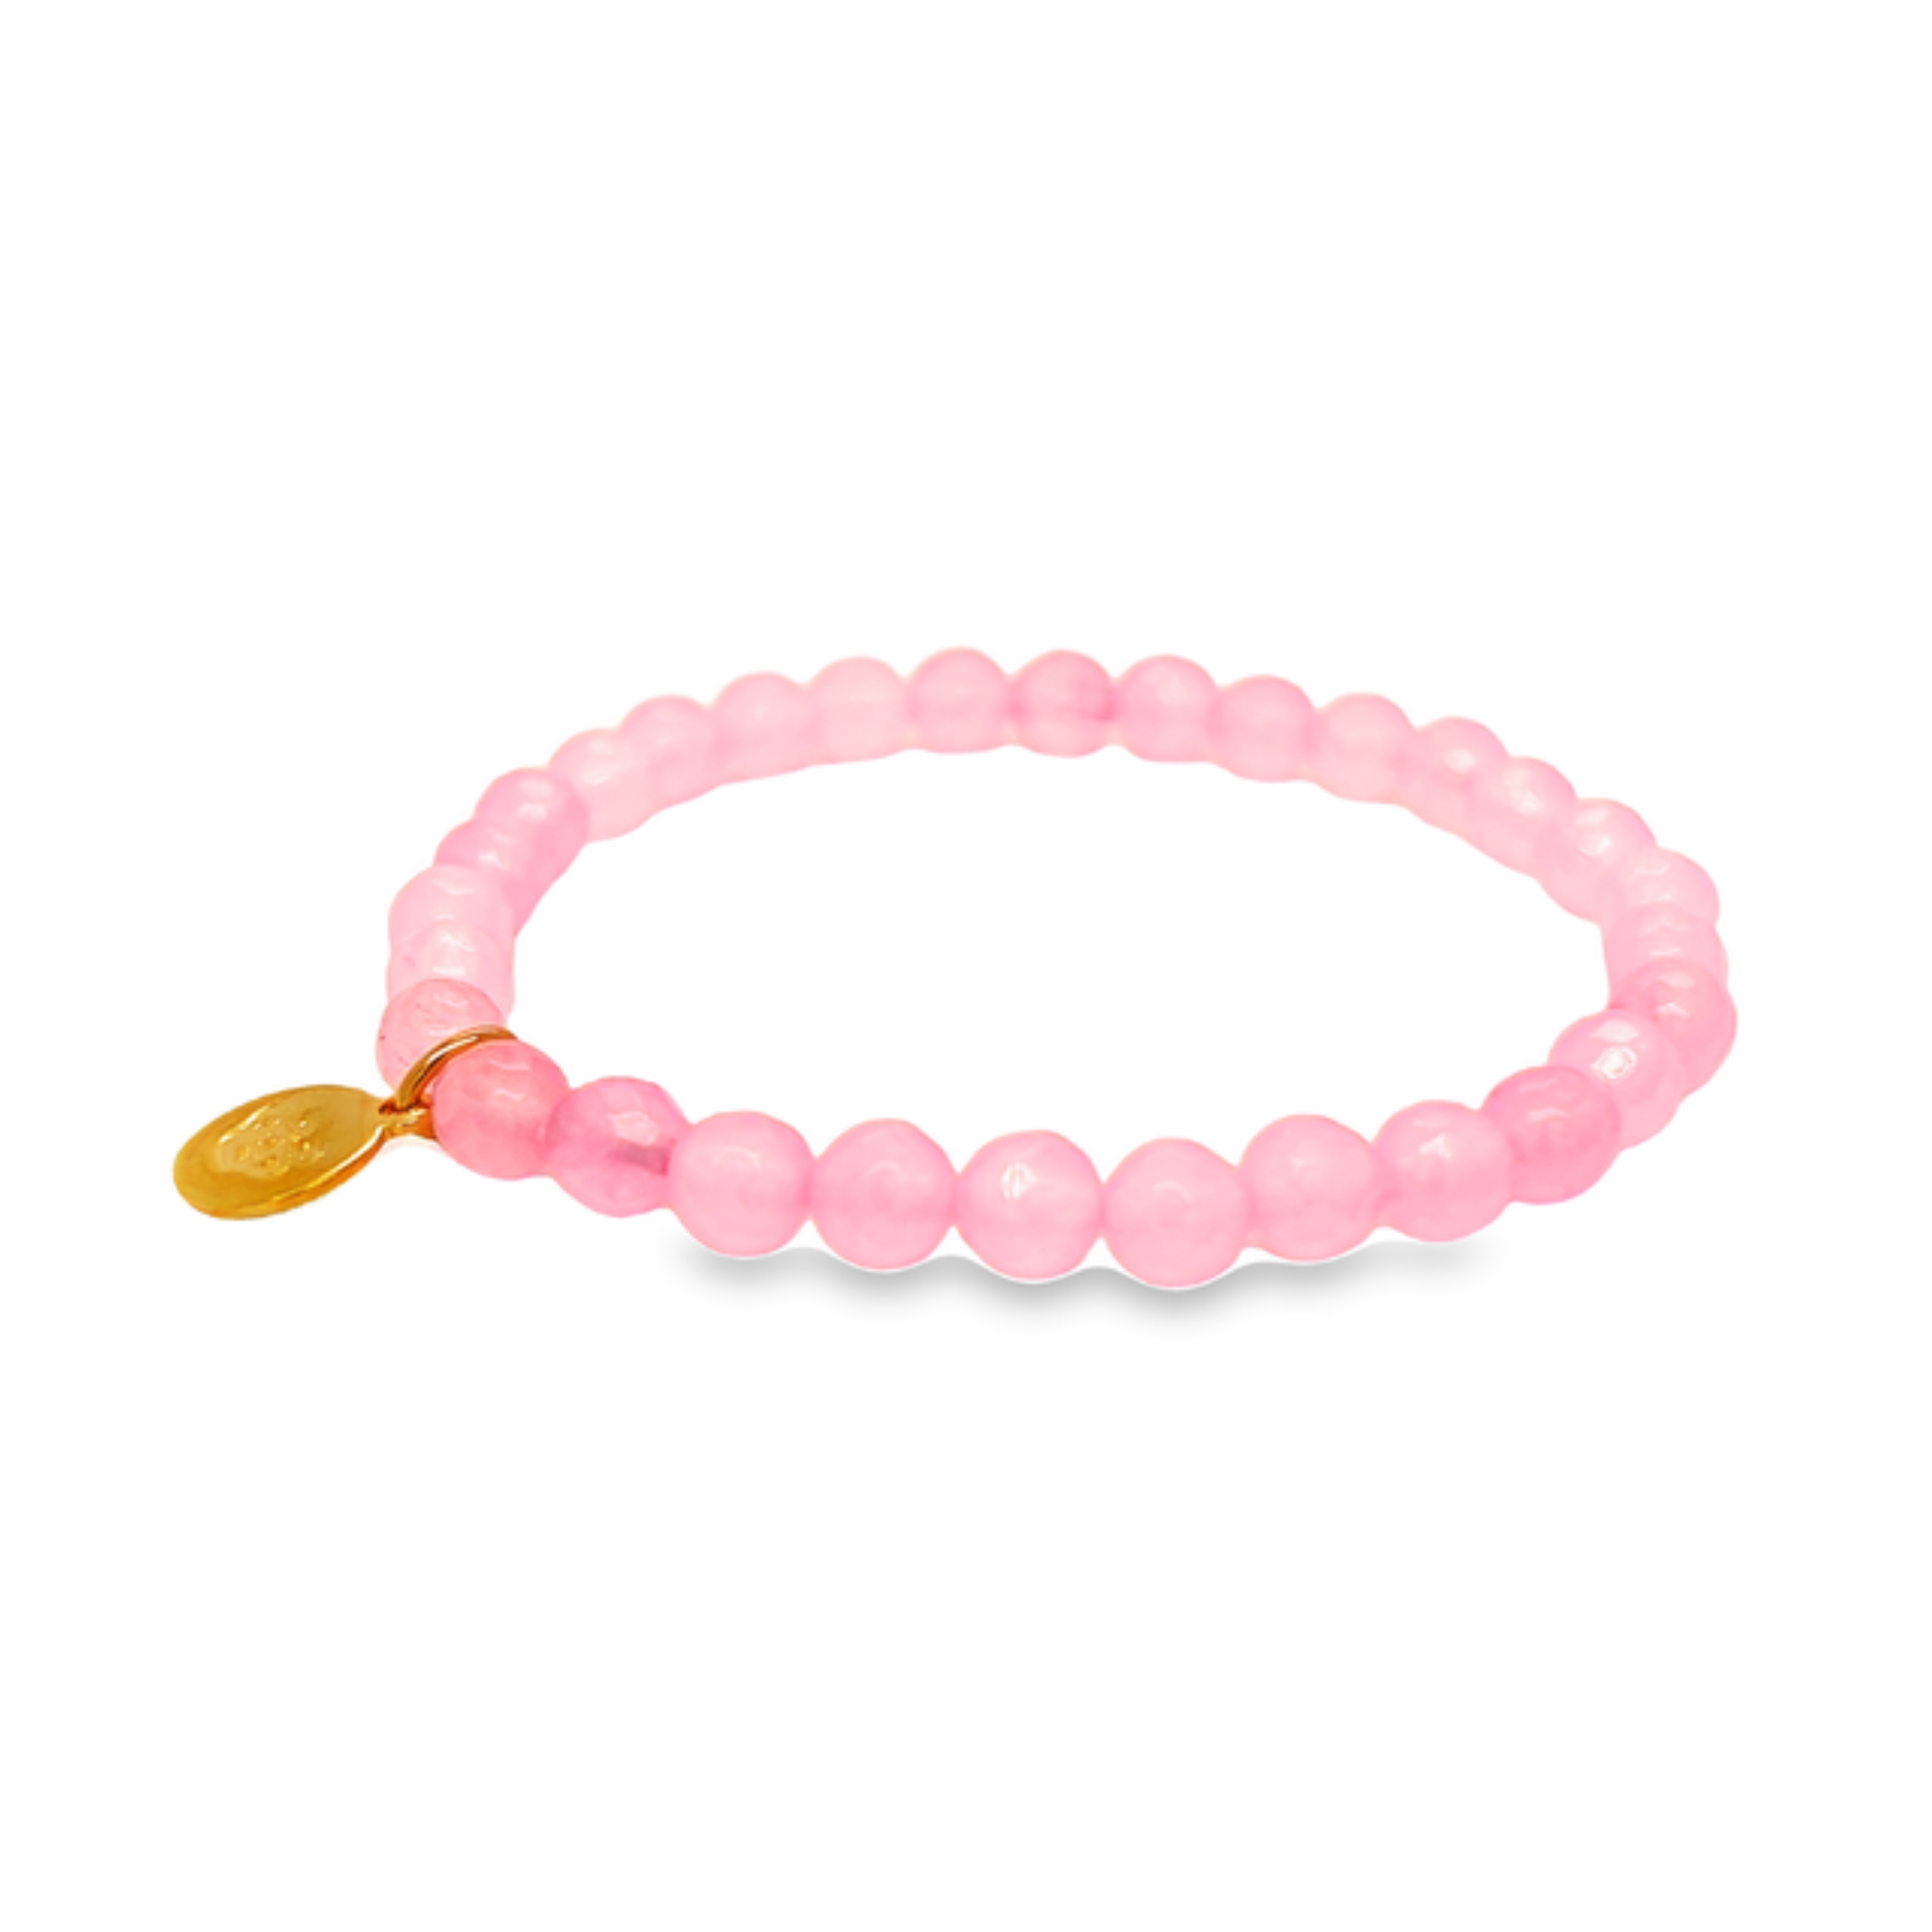 Rose Quartz bracelet for the Hurwitz Breast Cancer Fund.   100% of proceeds will support the Hurwitz Breast Cancer Fund